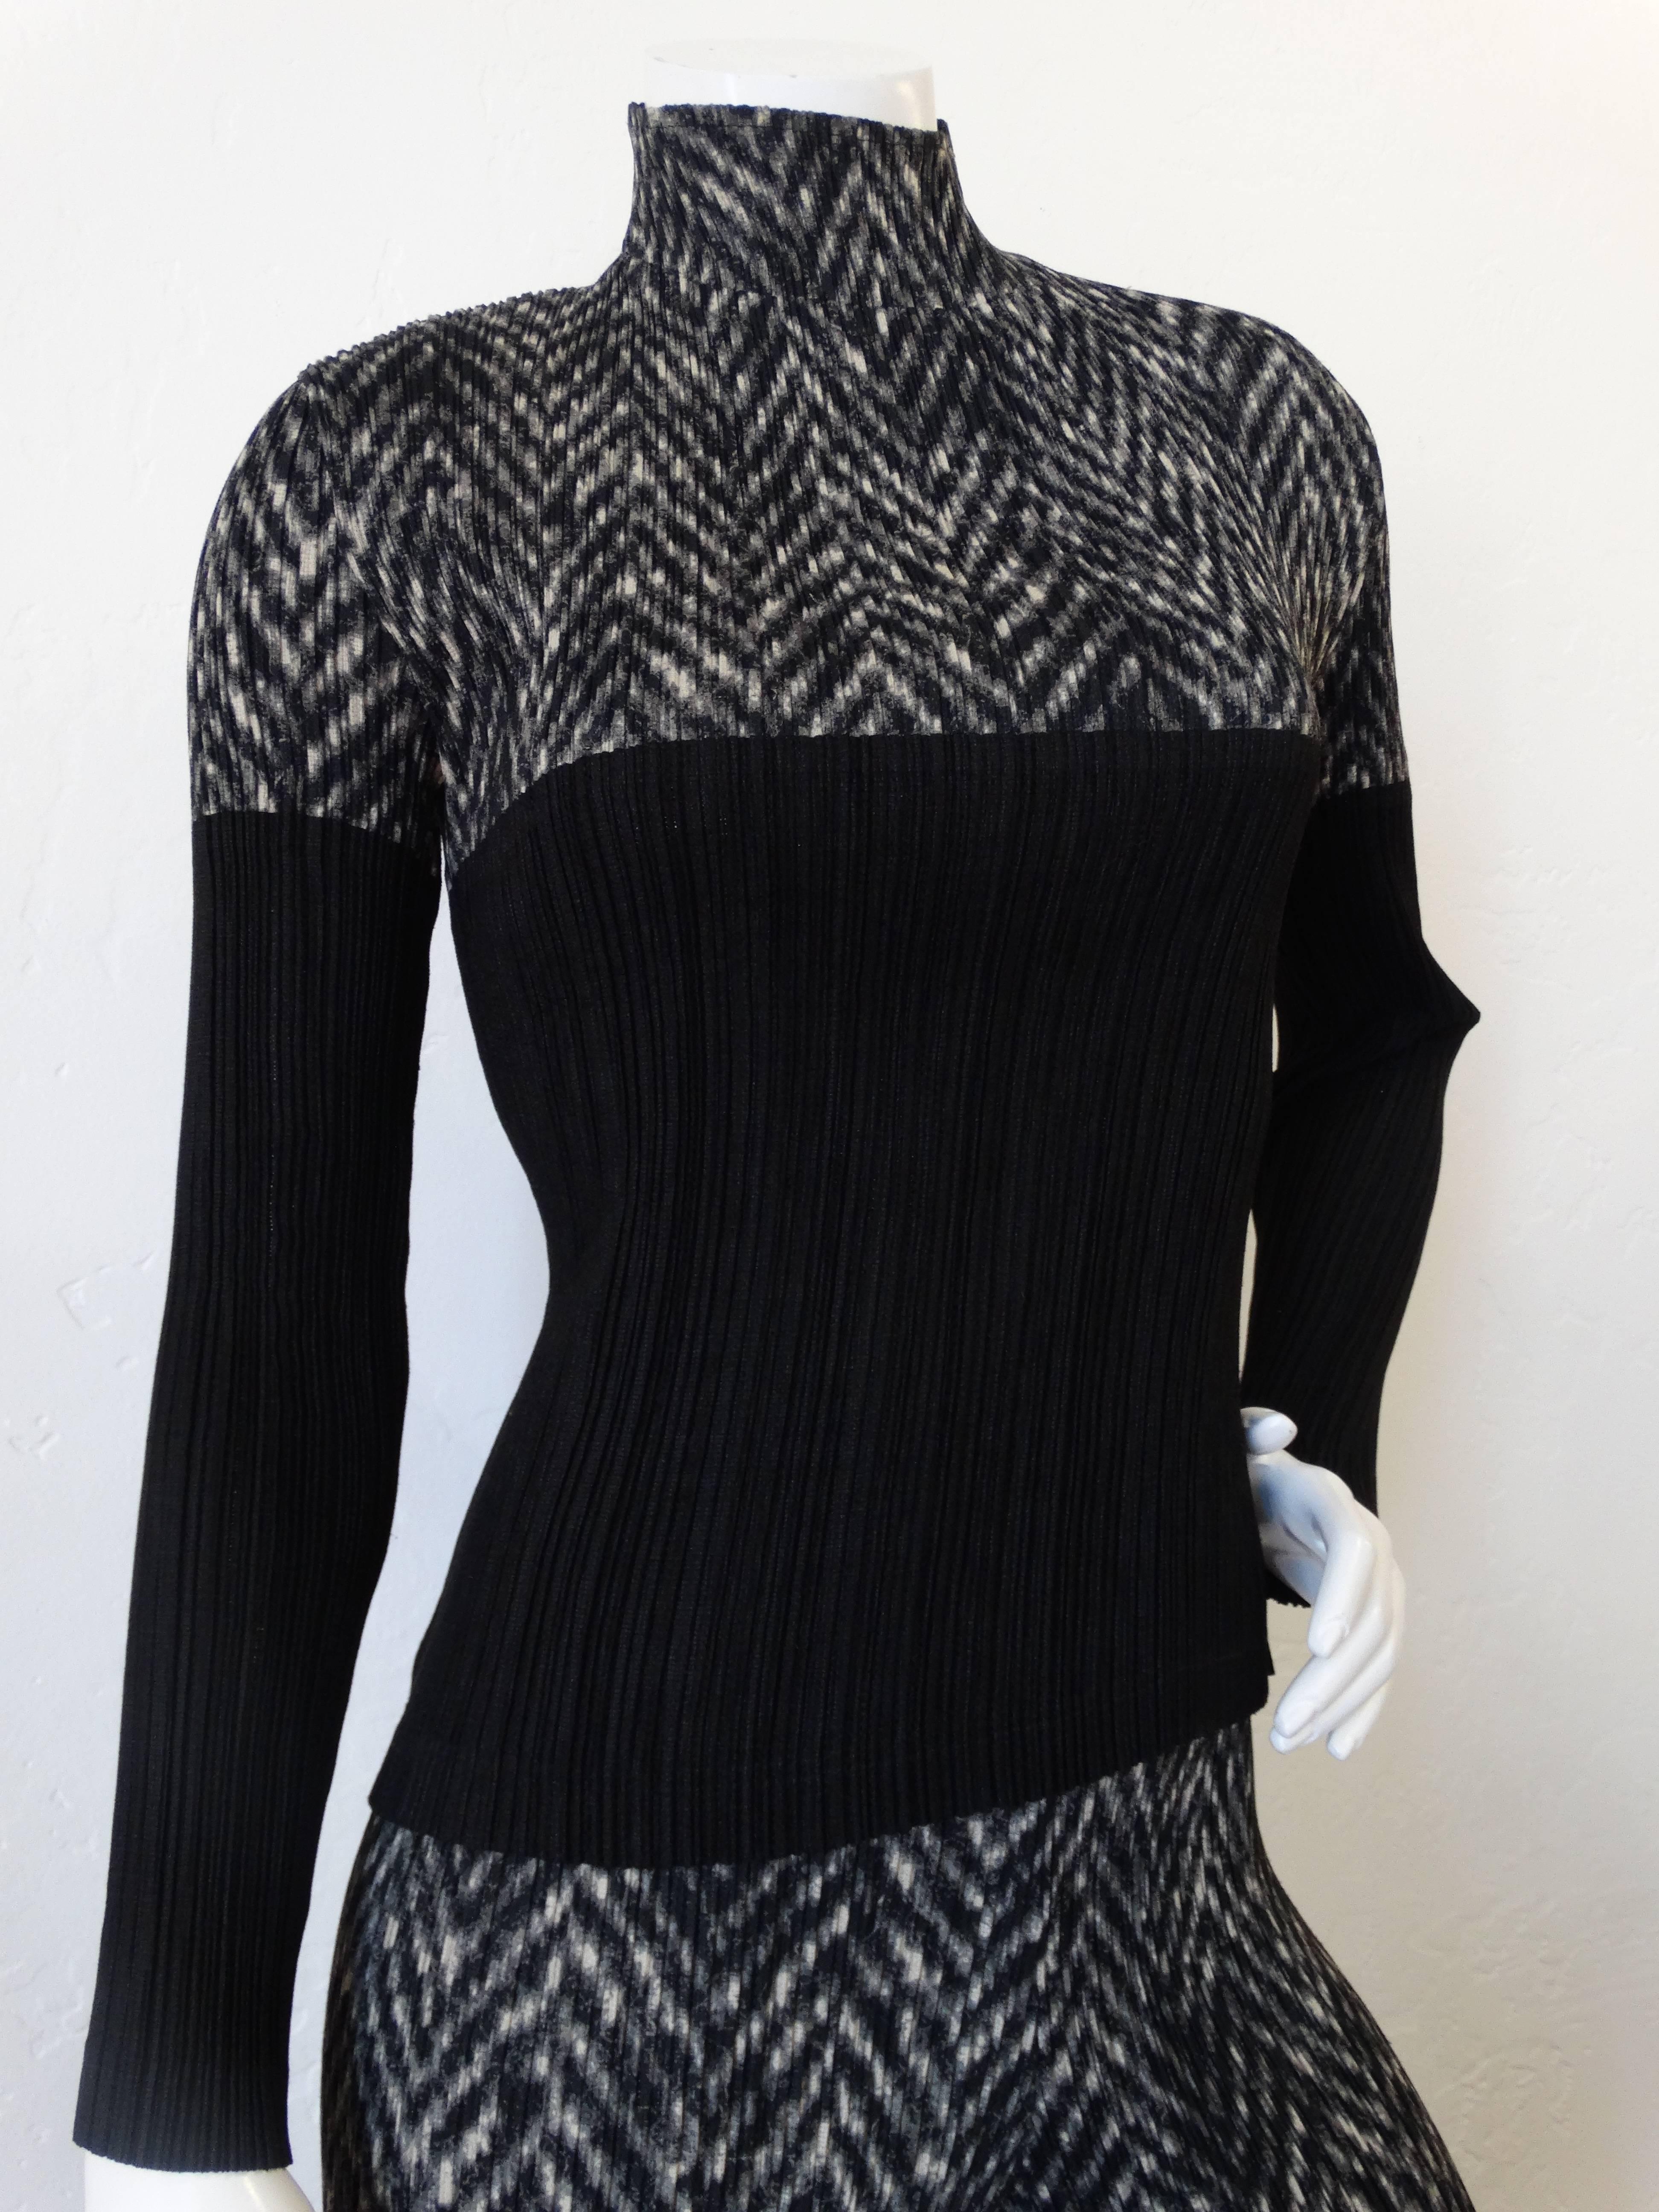 Incredible Issey Miyake matching set! Classic Issey micro pleats. Turtleneck style top with blocked chevron print. Tapered leg pant with a grey, white and black chevron print. Stretch waistline allows for a range of sizes. Made in Japan. Marked a